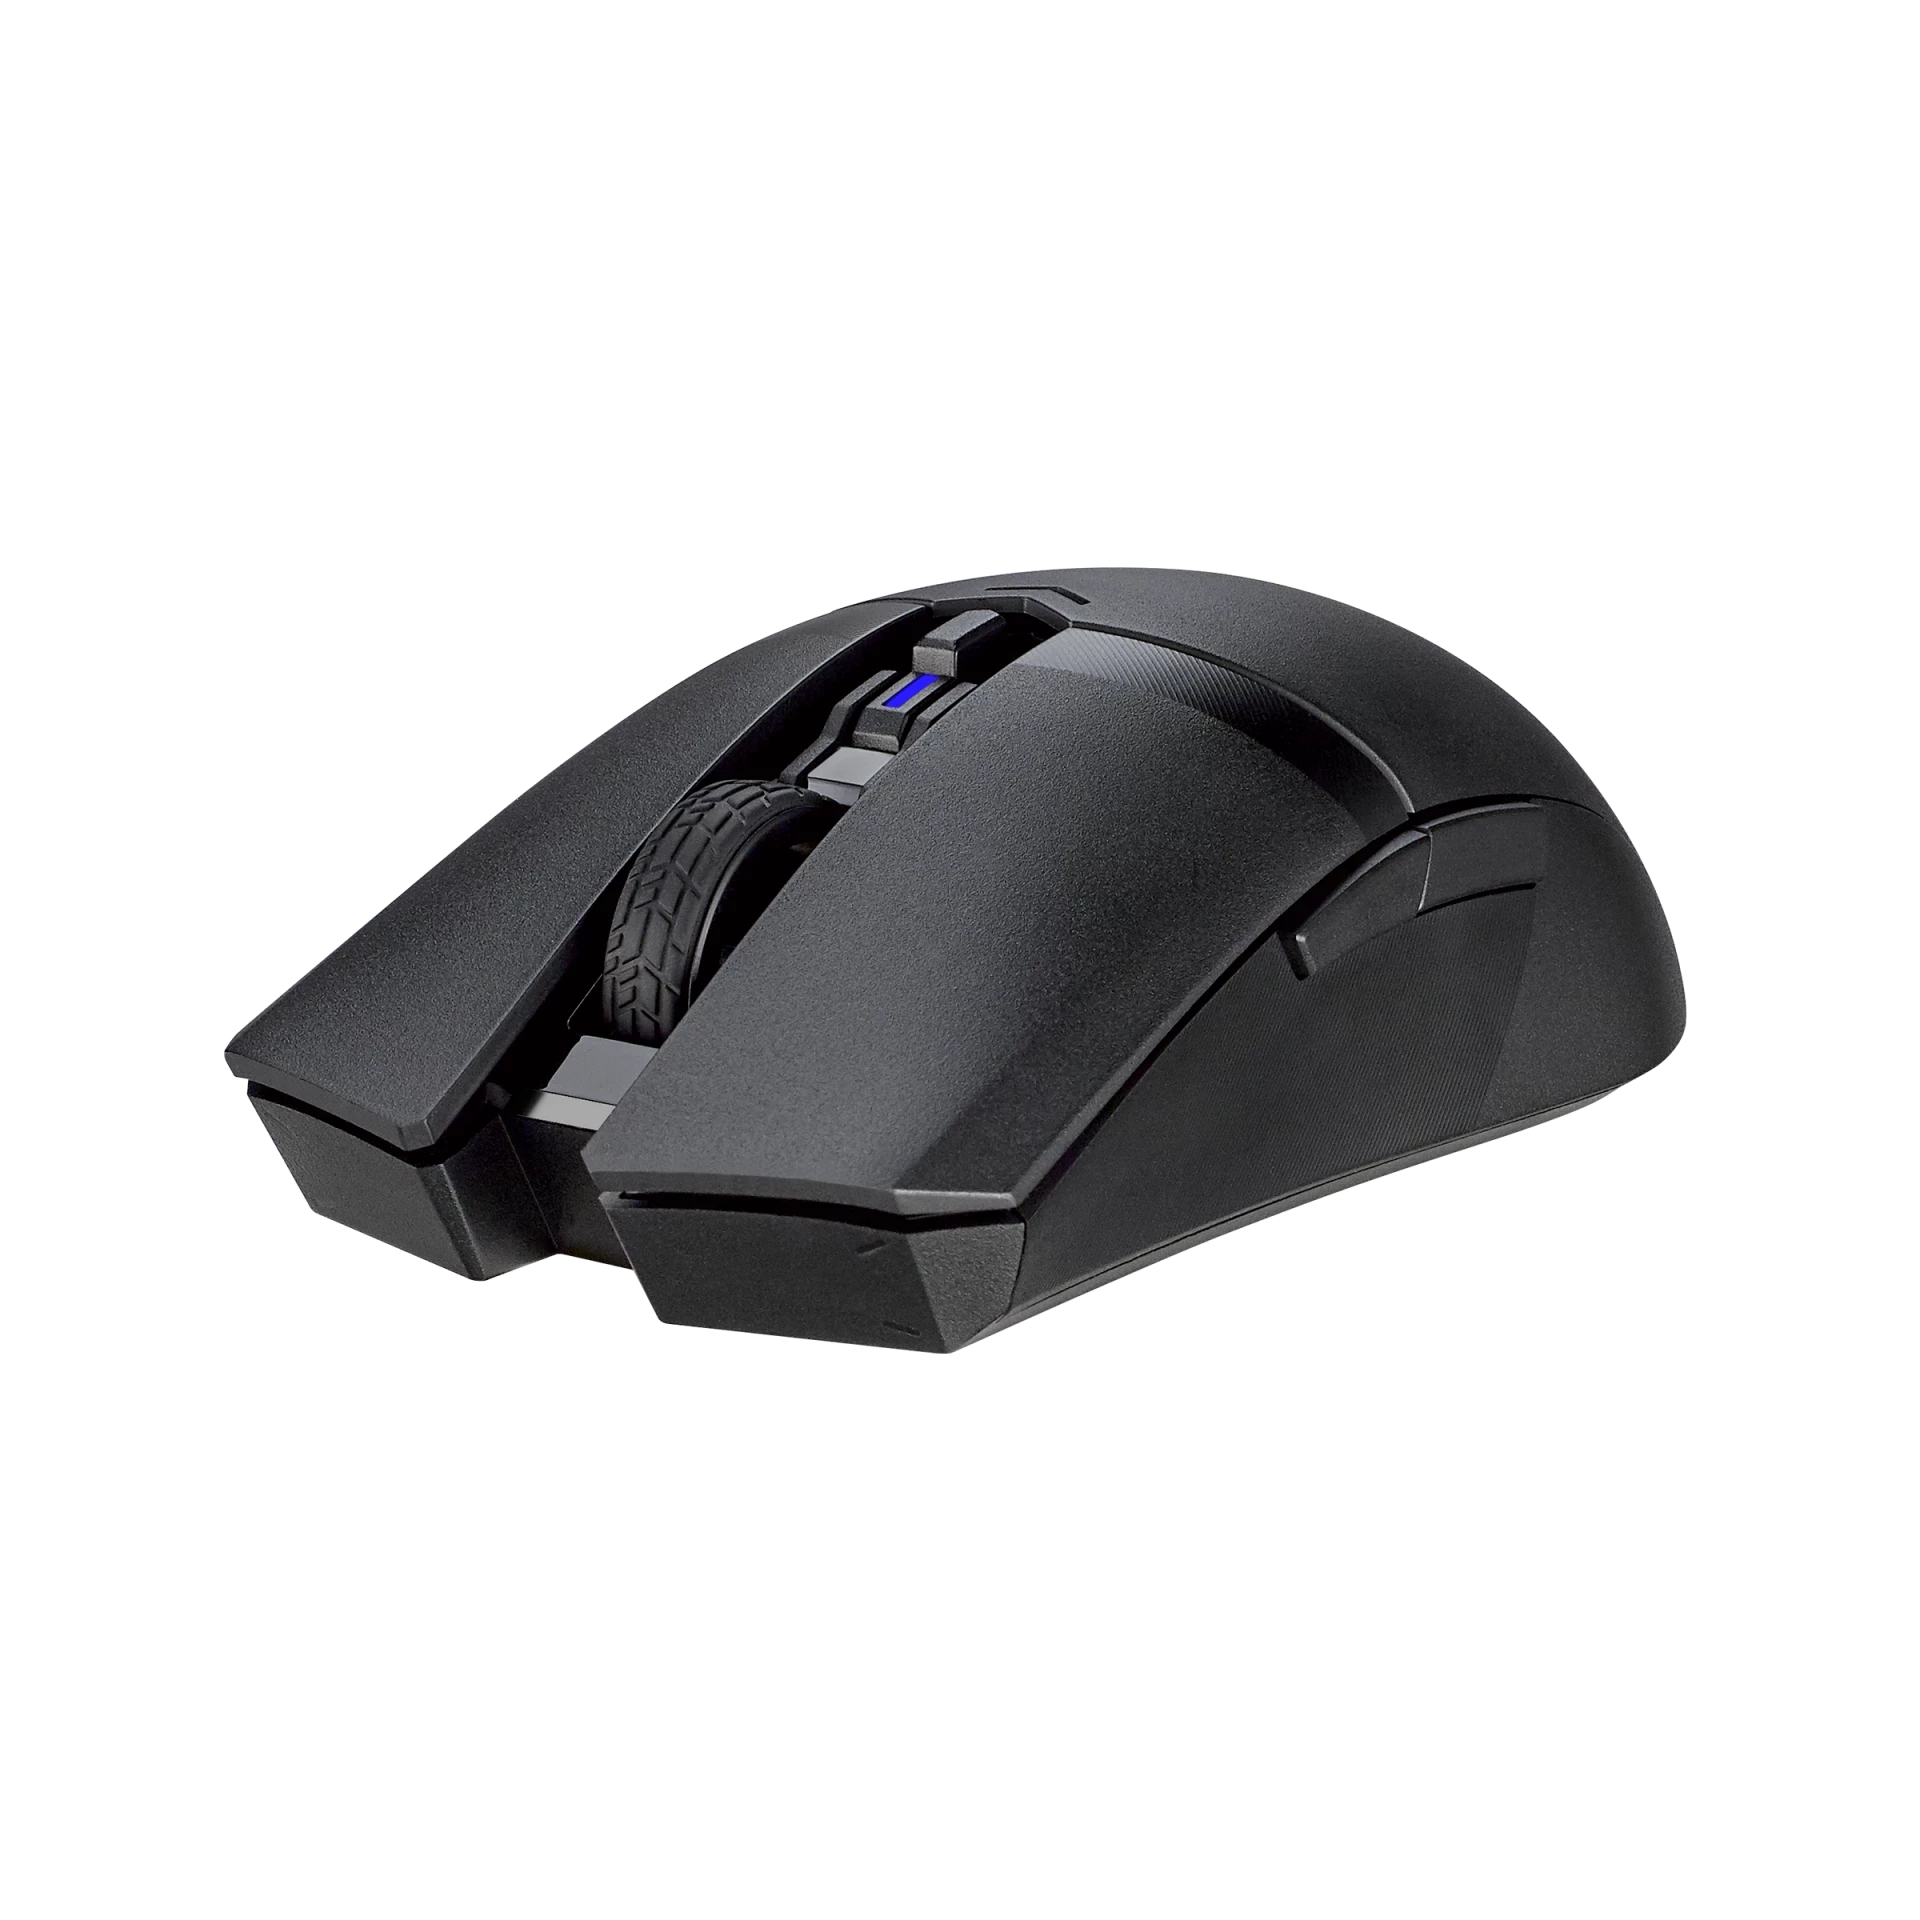 MOUSE ASUS TUF M4 Gaming Wireless